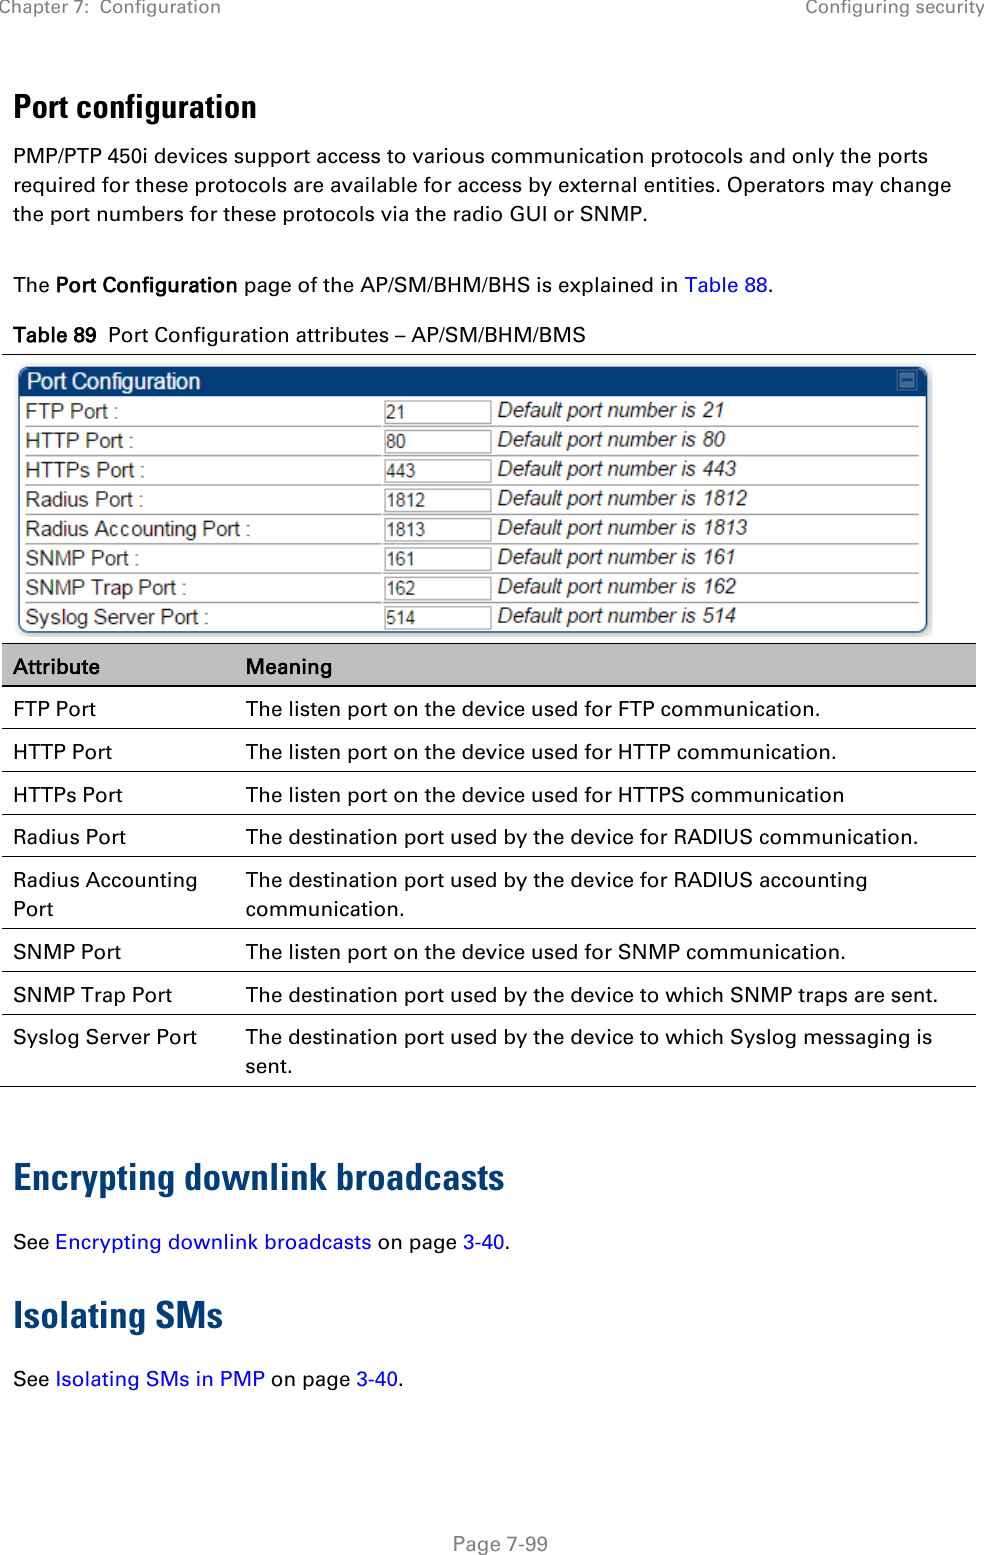 Chapter 7:  Configuration Configuring security   Page 7-99 Port configuration  PMP/PTP 450i devices support access to various communication protocols and only the ports required for these protocols are available for access by external entities. Operators may change the port numbers for these protocols via the radio GUI or SNMP.  The Port Configuration page of the AP/SM/BHM/BHS is explained in Table 88. Table 89  Port Configuration attributes – AP/SM/BHM/BMS  Attribute Meaning FTP Port The listen port on the device used for FTP communication. HTTP Port The listen port on the device used for HTTP communication. HTTPs Port The listen port on the device used for HTTPS communication Radius Port The destination port used by the device for RADIUS communication. Radius Accounting Port The destination port used by the device for RADIUS accounting communication. SNMP Port The listen port on the device used for SNMP communication. SNMP Trap Port The destination port used by the device to which SNMP traps are sent. Syslog Server Port The destination port used by the device to which Syslog messaging is sent.  Encrypting downlink broadcasts See Encrypting downlink broadcasts on page 3-40. Isolating SMs See Isolating SMs in PMP on page 3-40.   